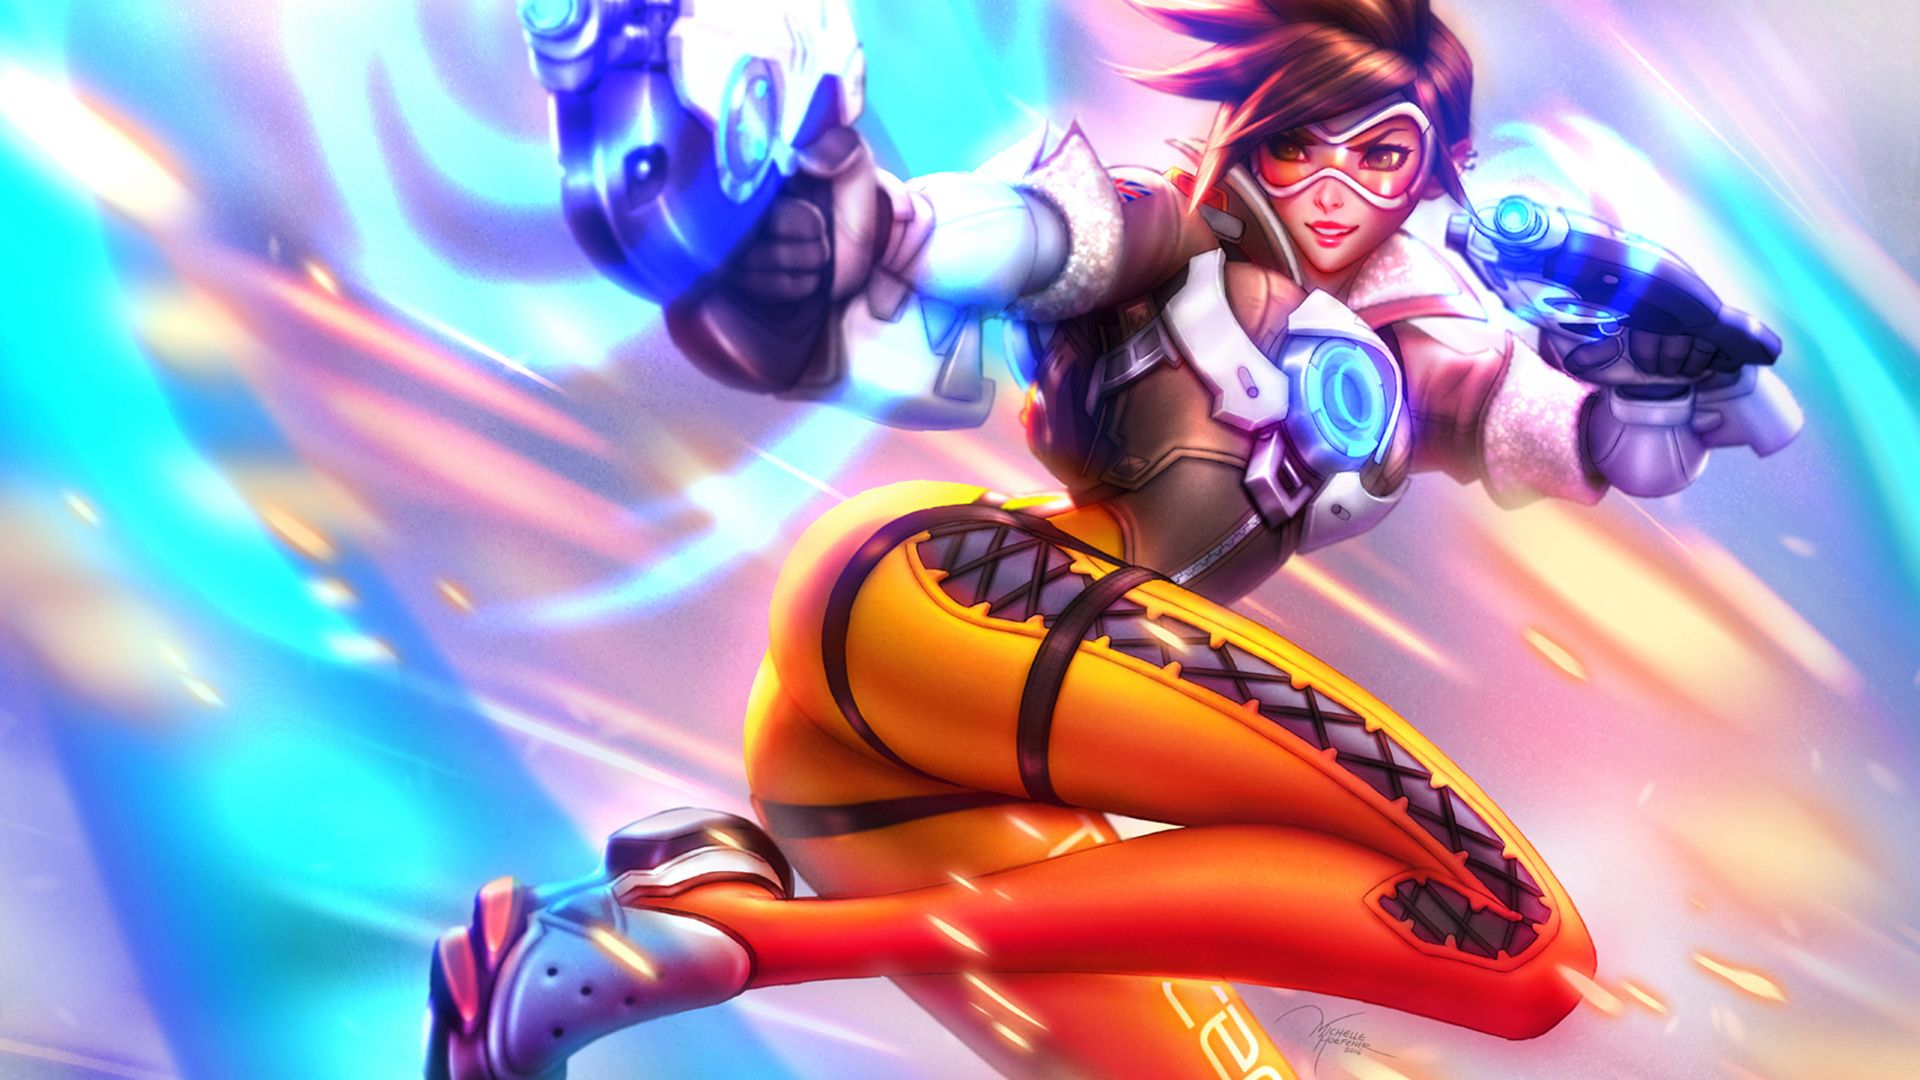 Video Game Overwatch Tracer (Overwatch) Wallpaper  Overwatch, Overwatch  tracer, Overwatch wallpapers